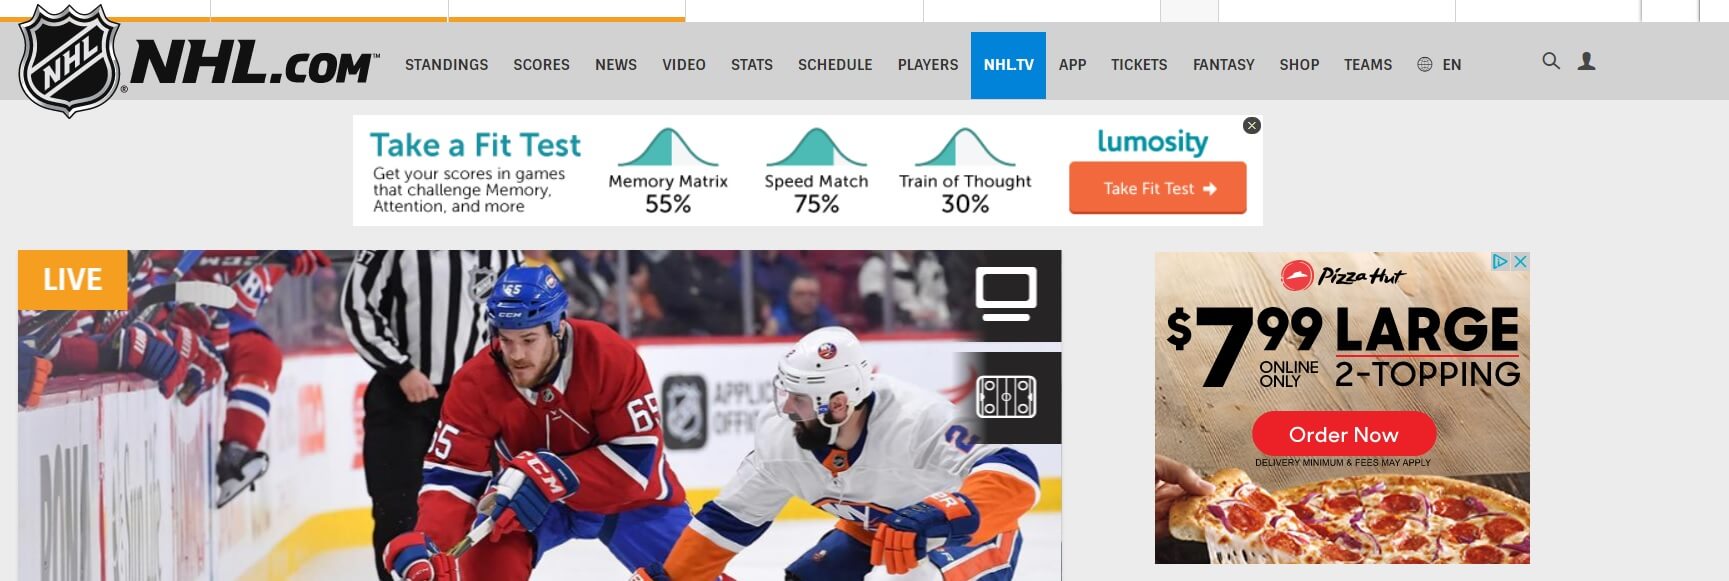 Examples of prominent ad placements on the NHL website